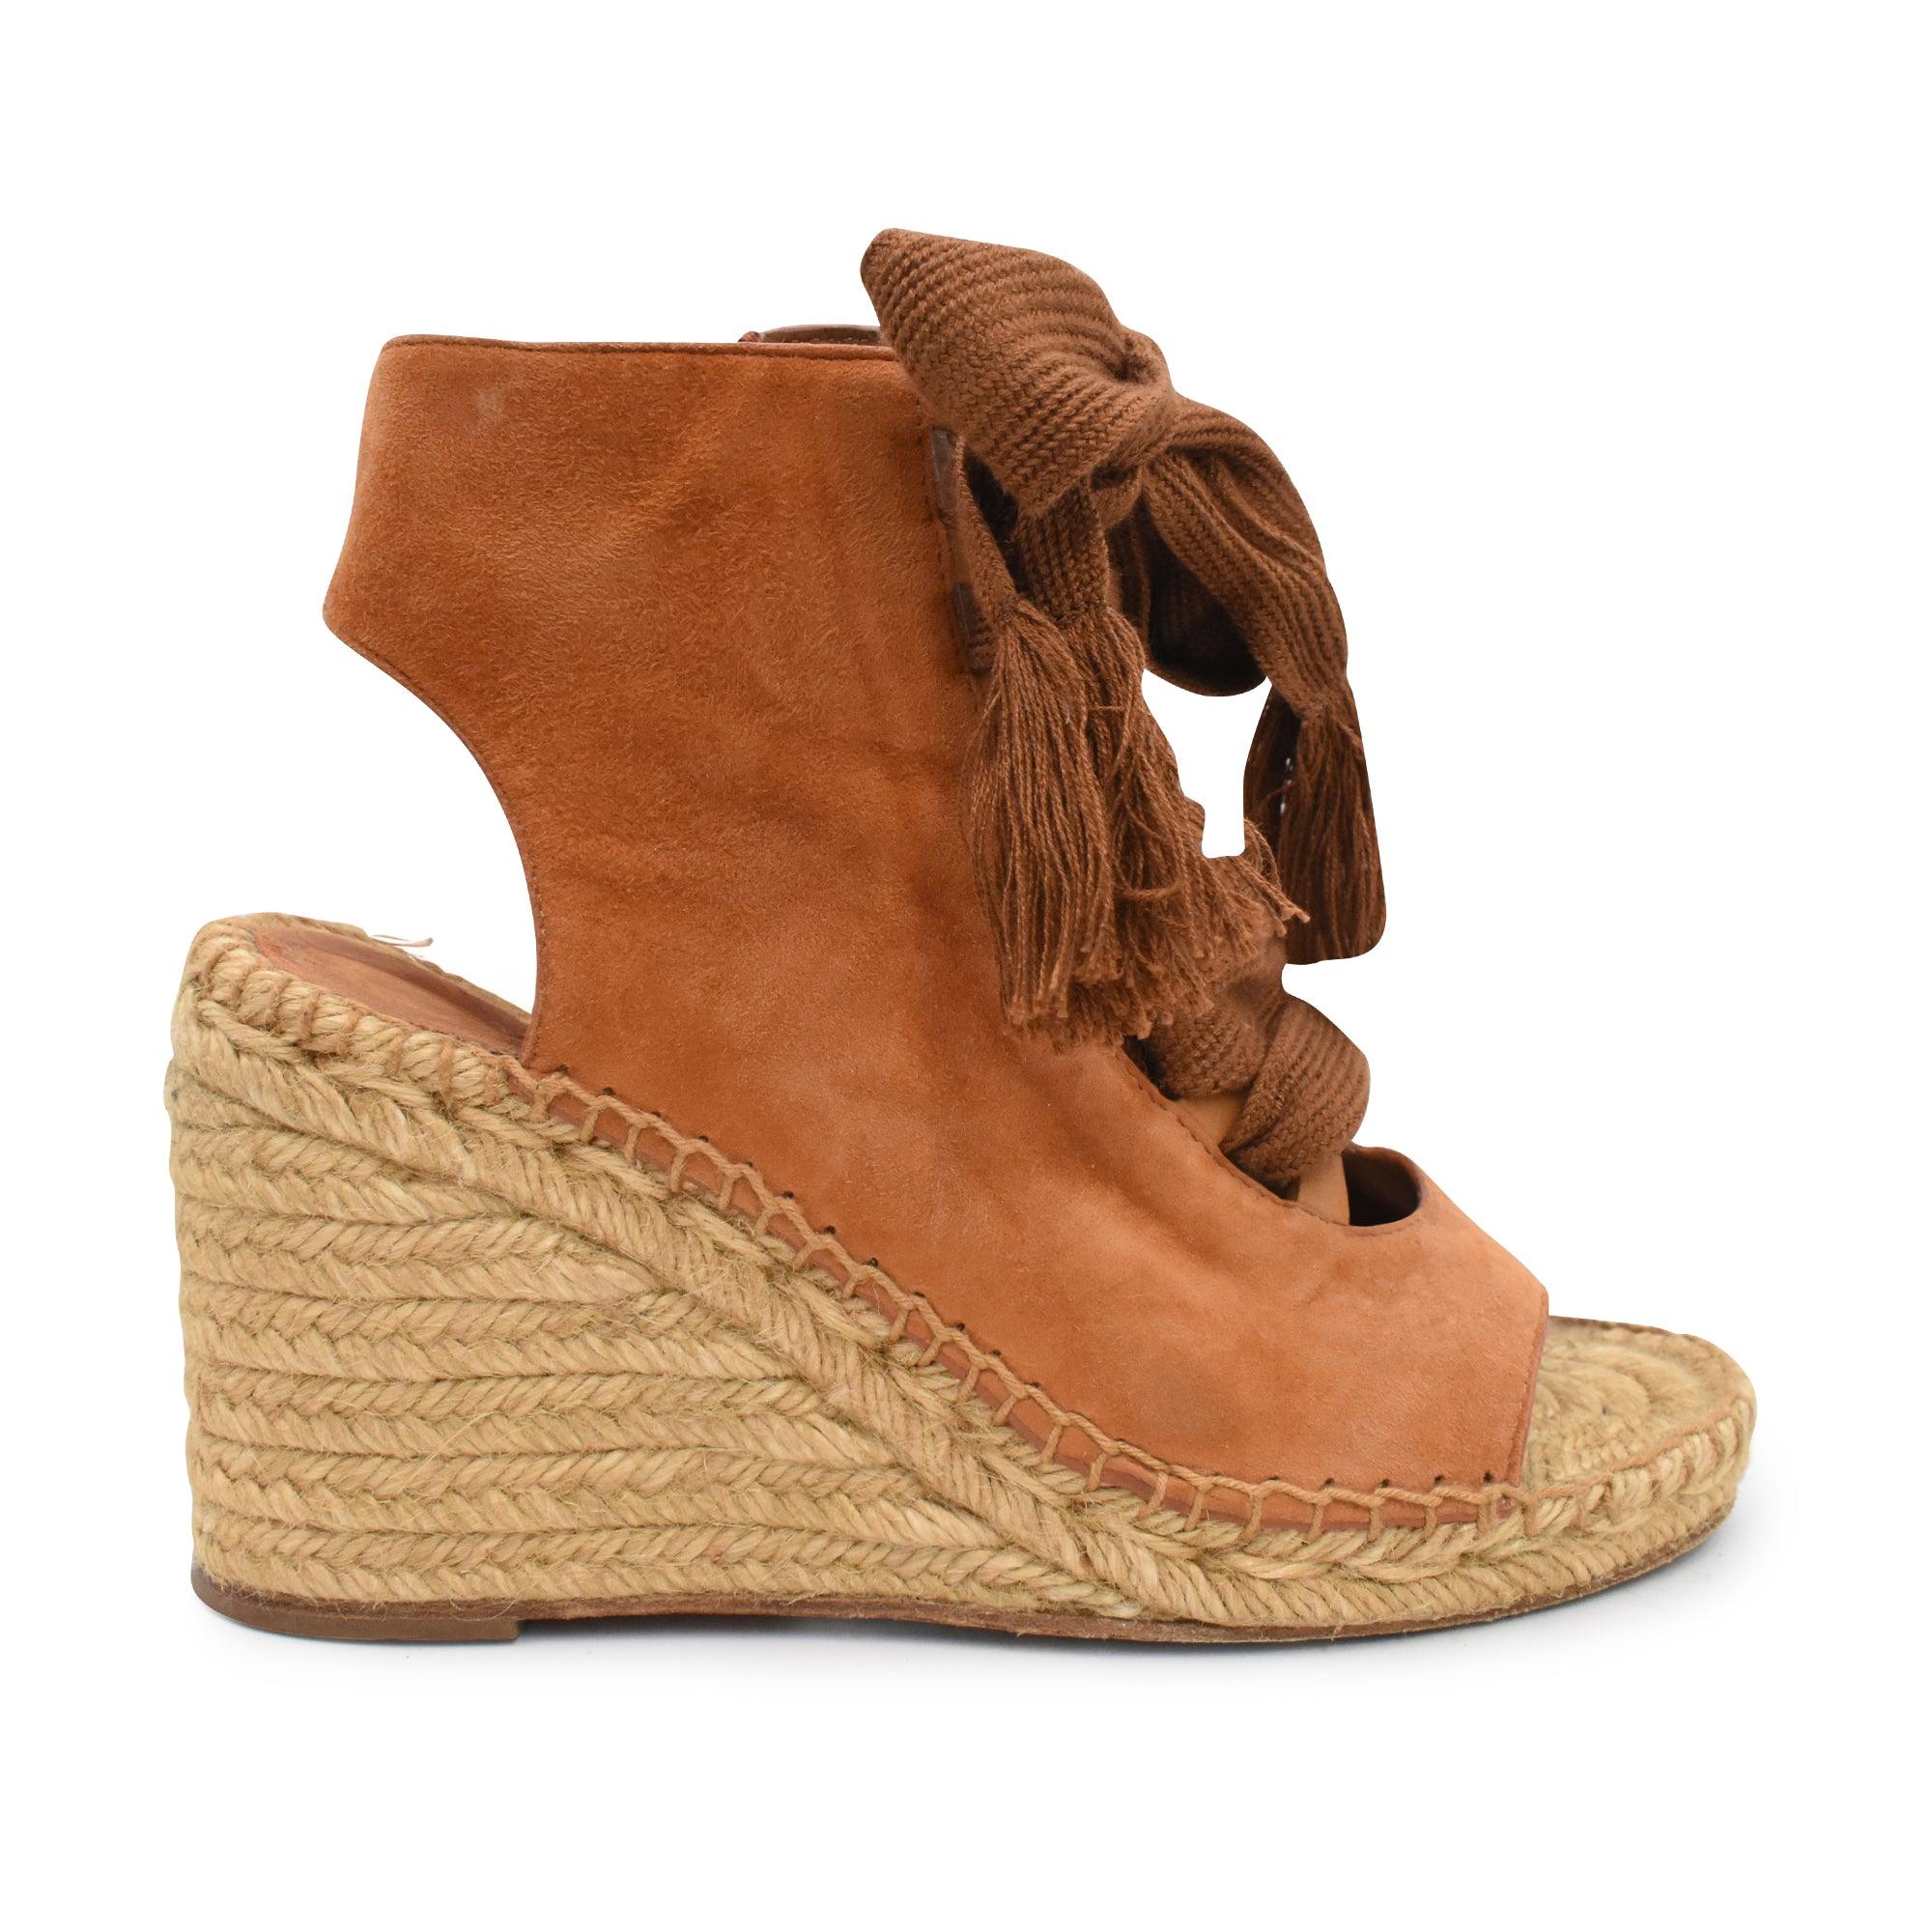 Chloe Wedges - Women's 35 - Fashionably Yours